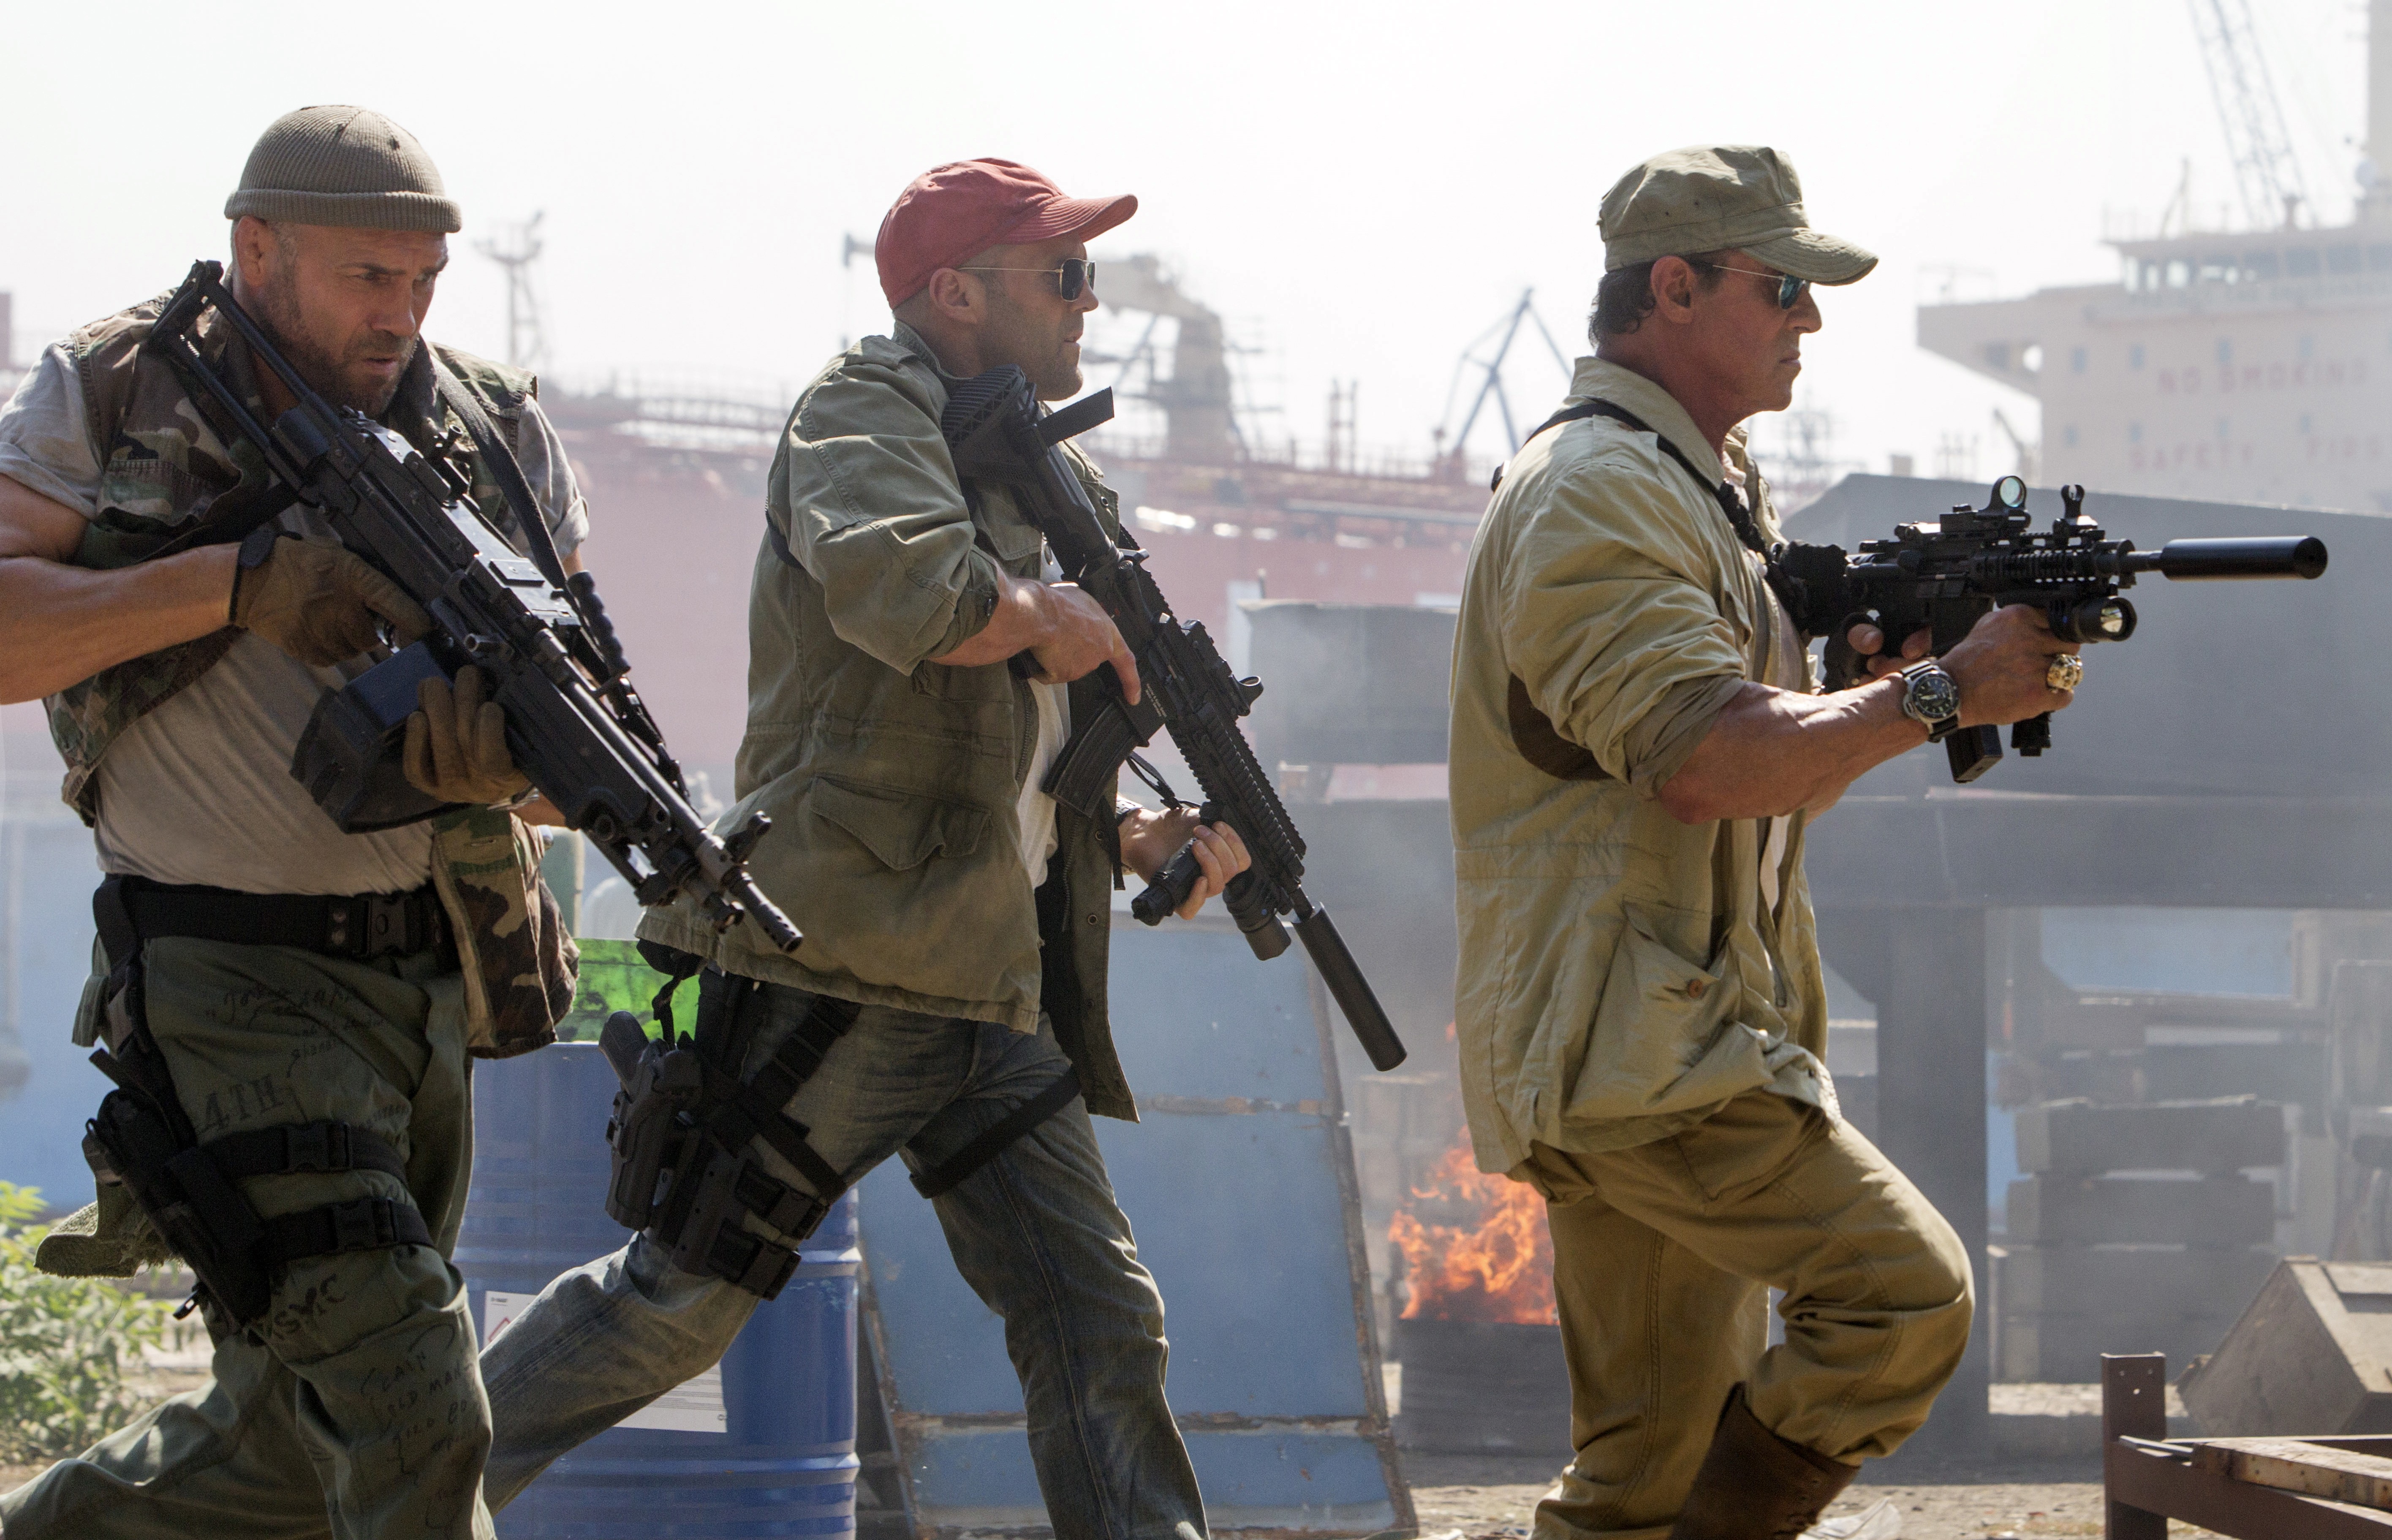 jason statham, movie, the expendables 3, barney ross, lee christmas, randy couture, sylvester stallone, toll road, the expendables